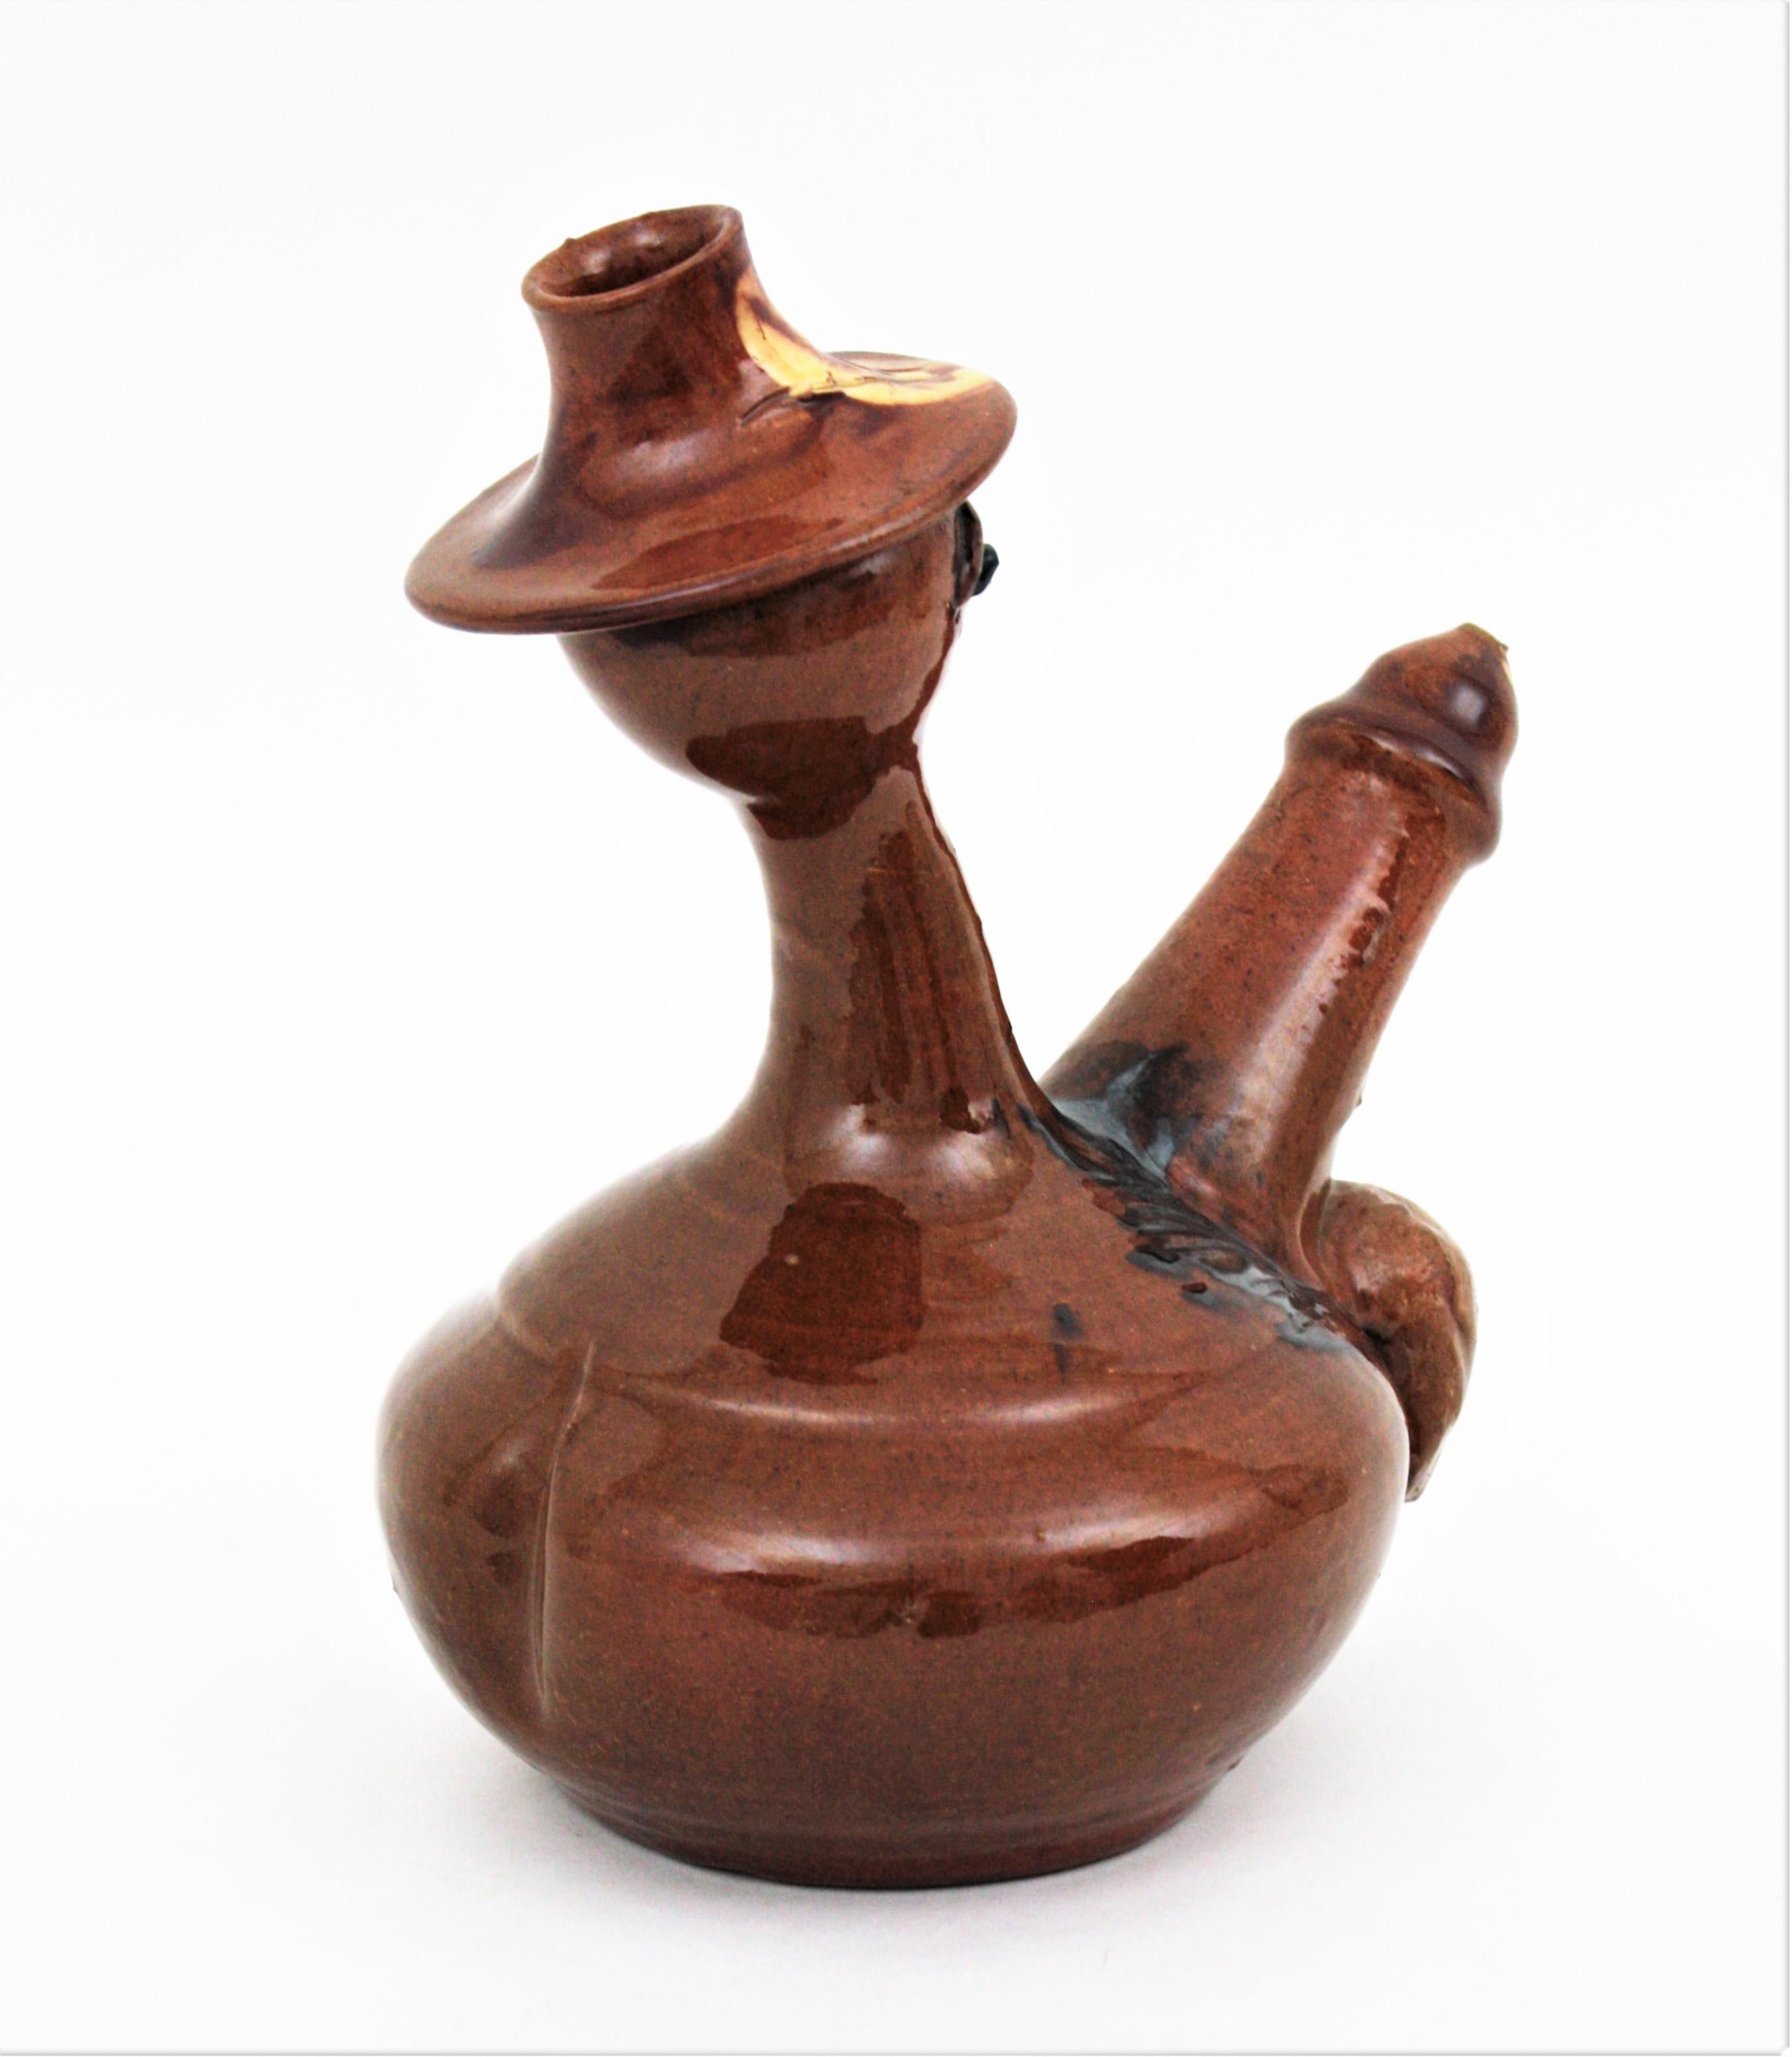 Hand-Crafted Spanish Terracotta Erotic Pitcher Man Phallic Design For Sale